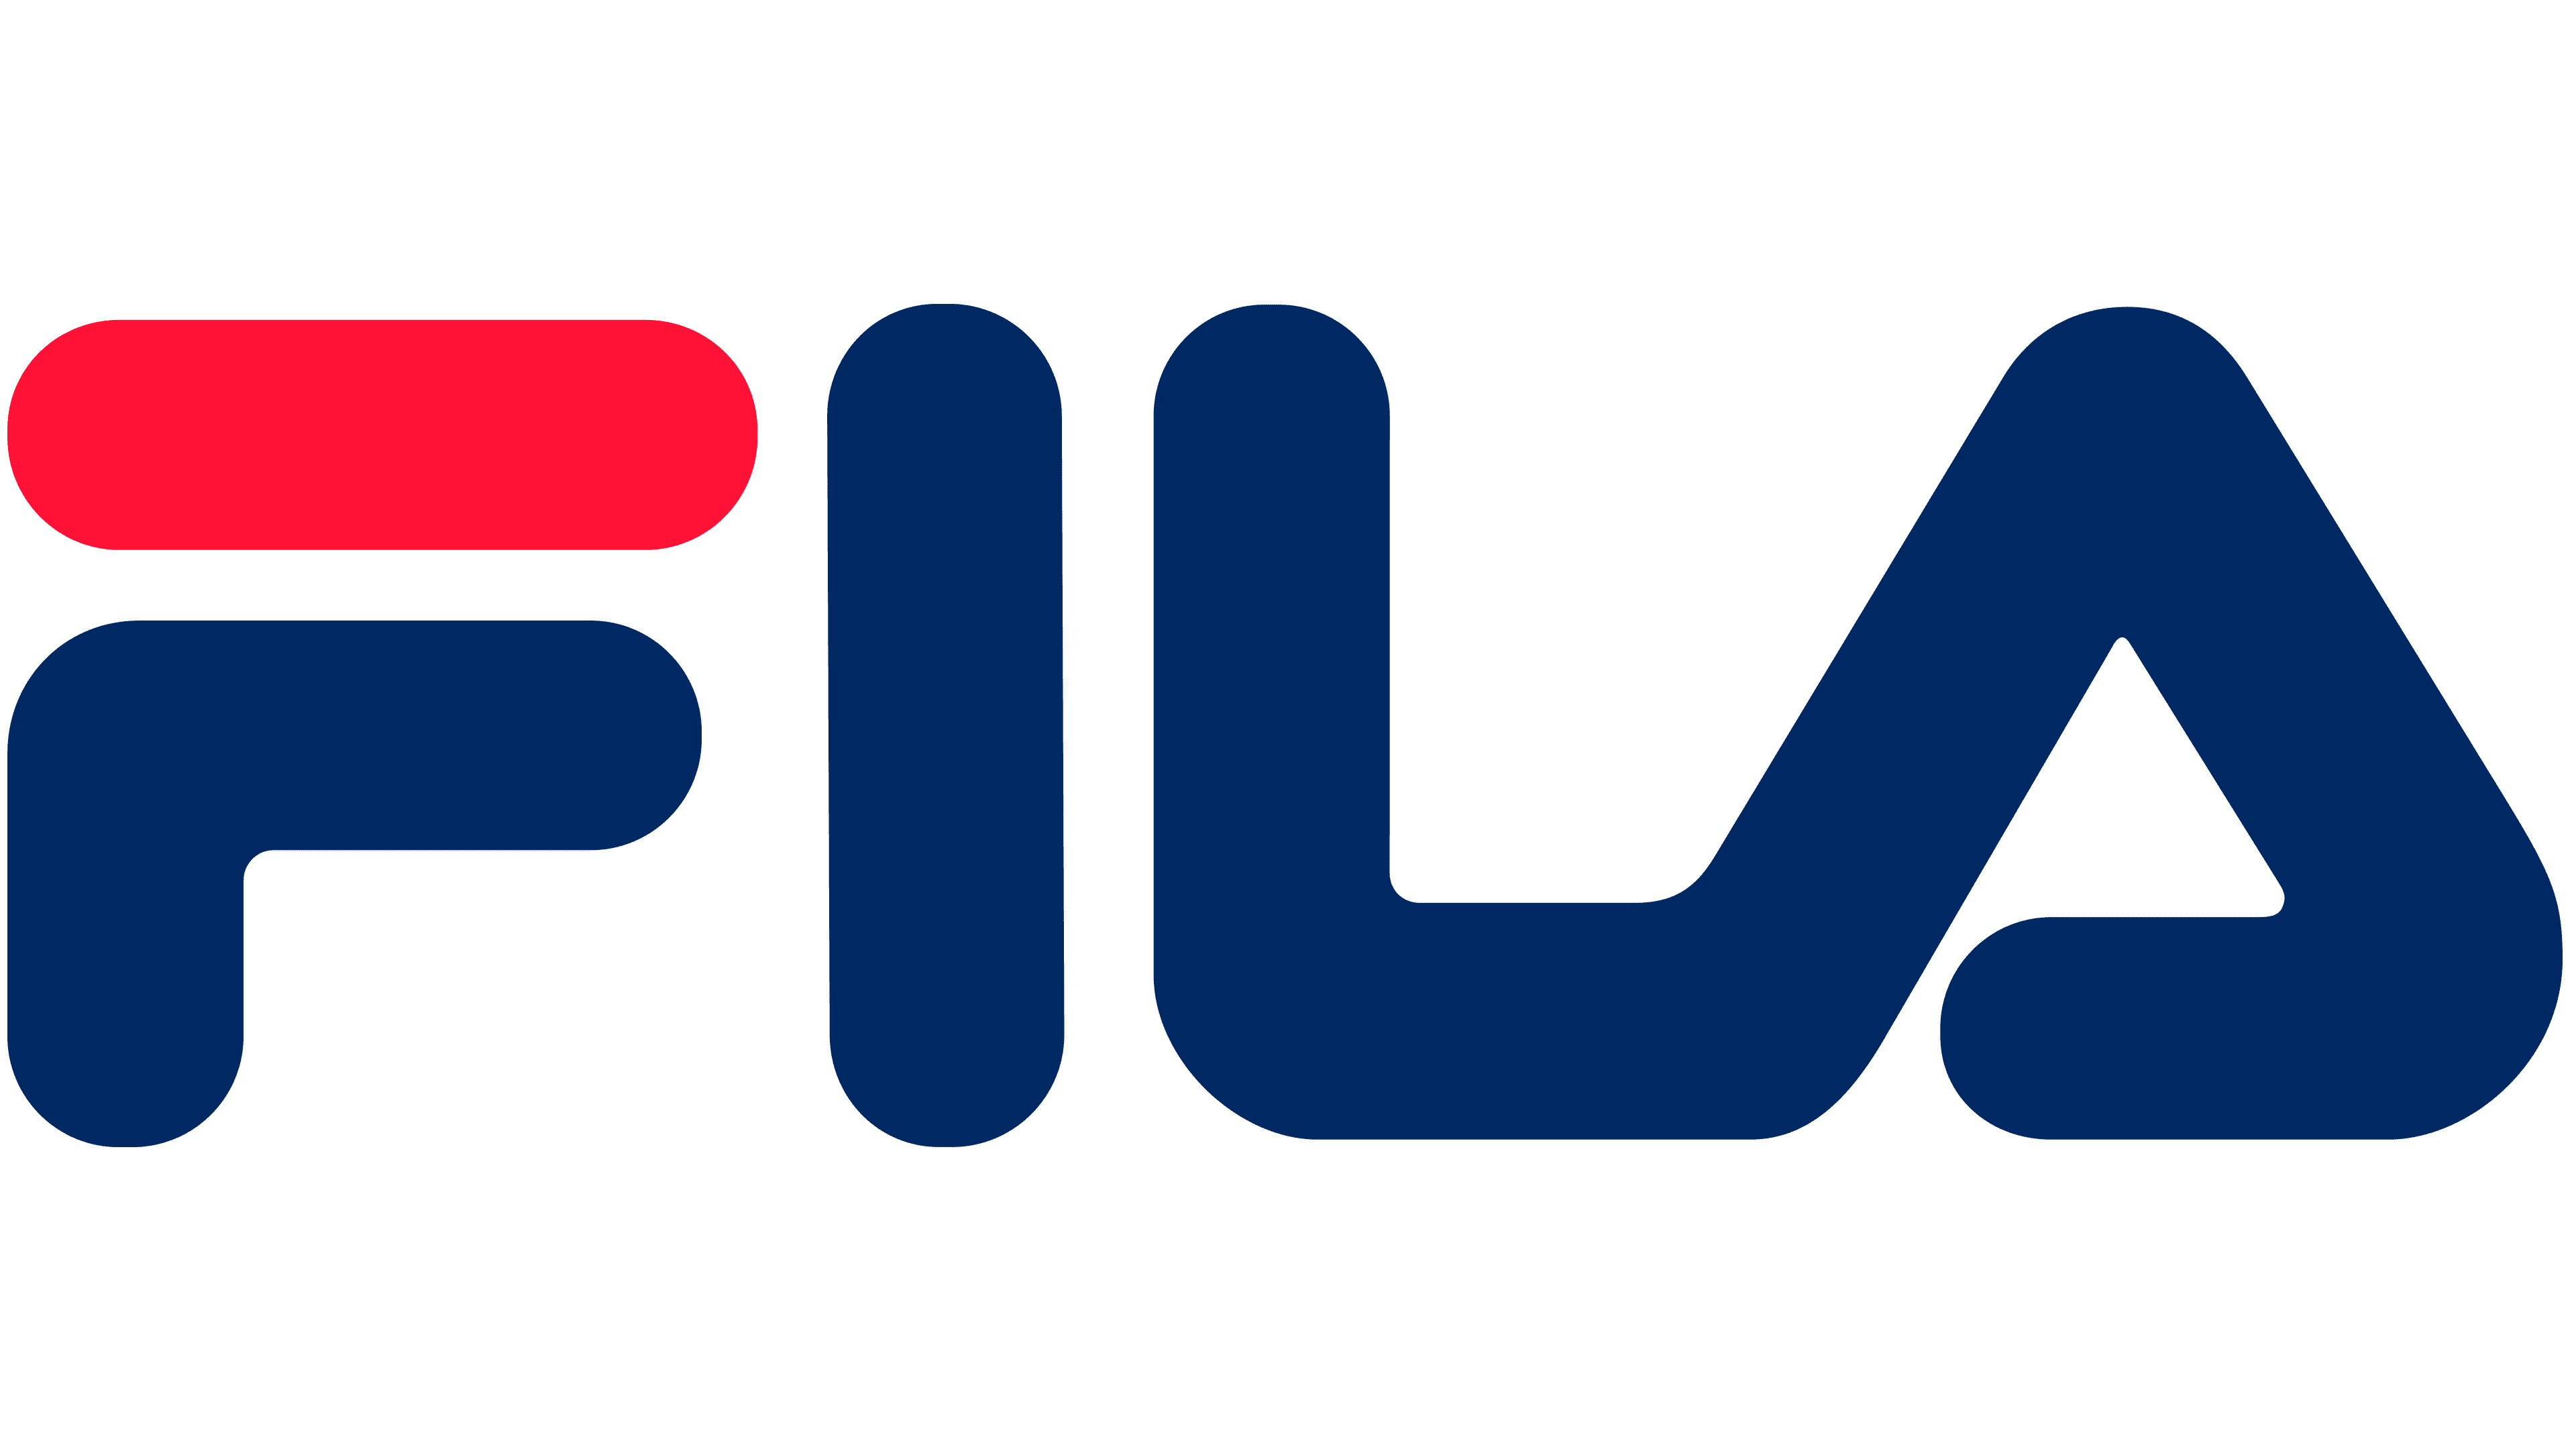 Fila Color Codes - Hex, RGB and CMYK Color Codes